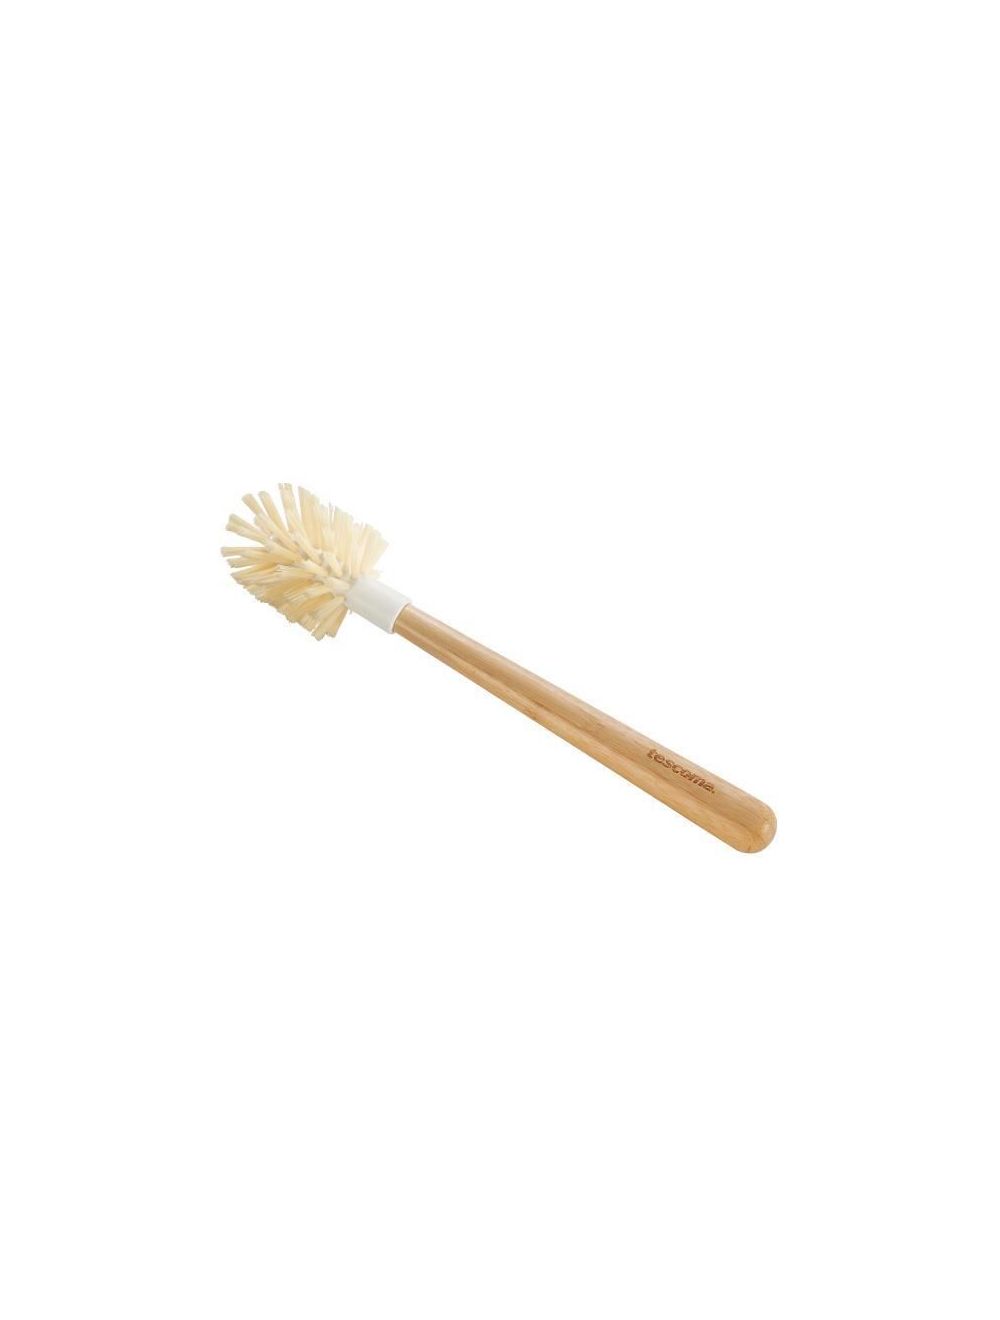 Tescoma Cleankit Bamboo Circular Brush for Dishes 27 cm